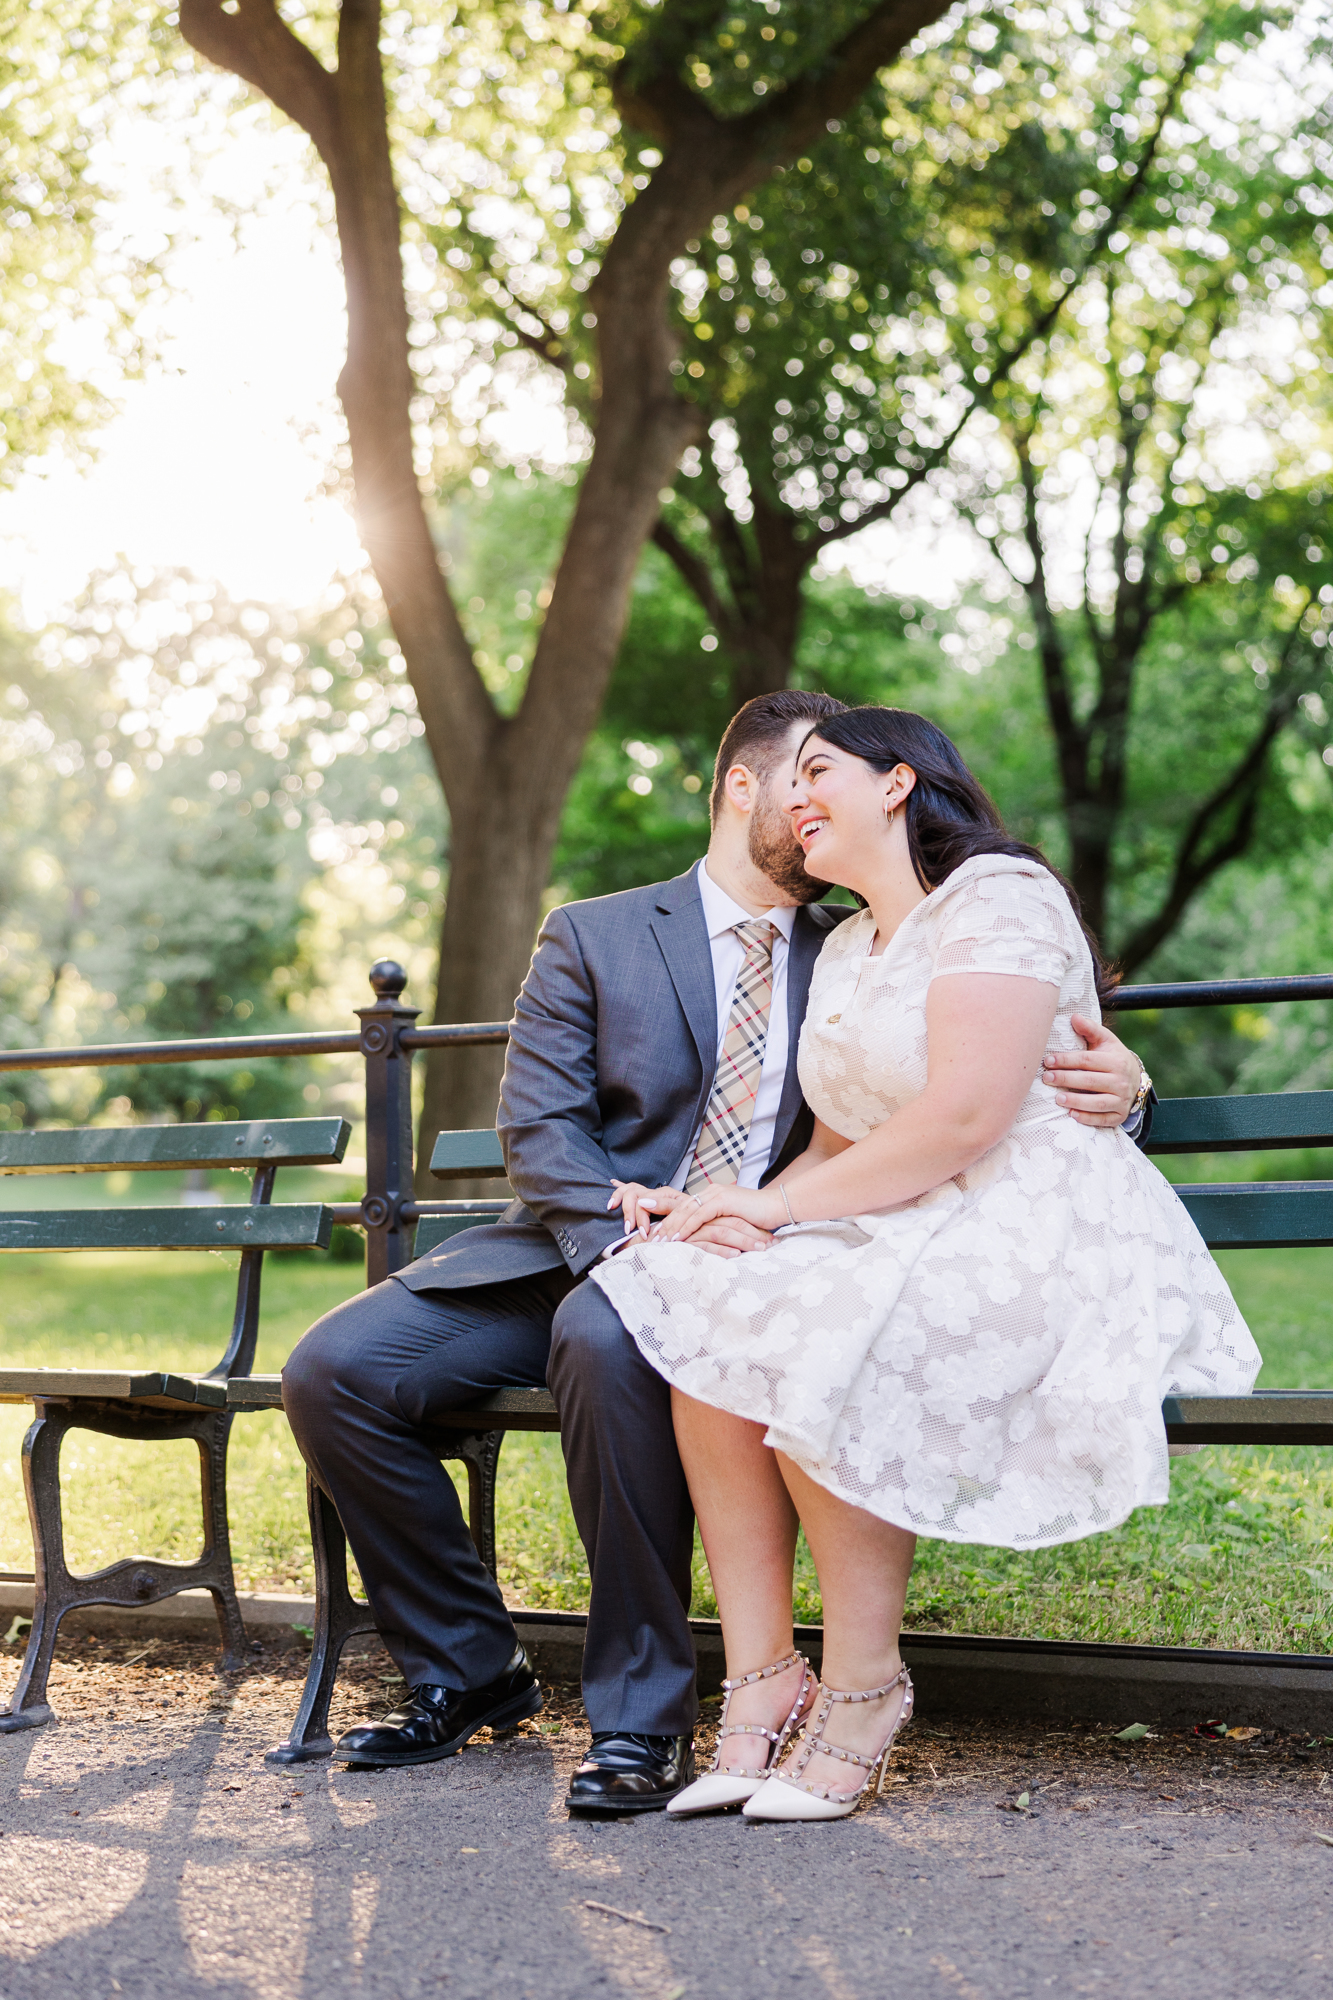 Dazzling Central Park Engagement Photos in New York